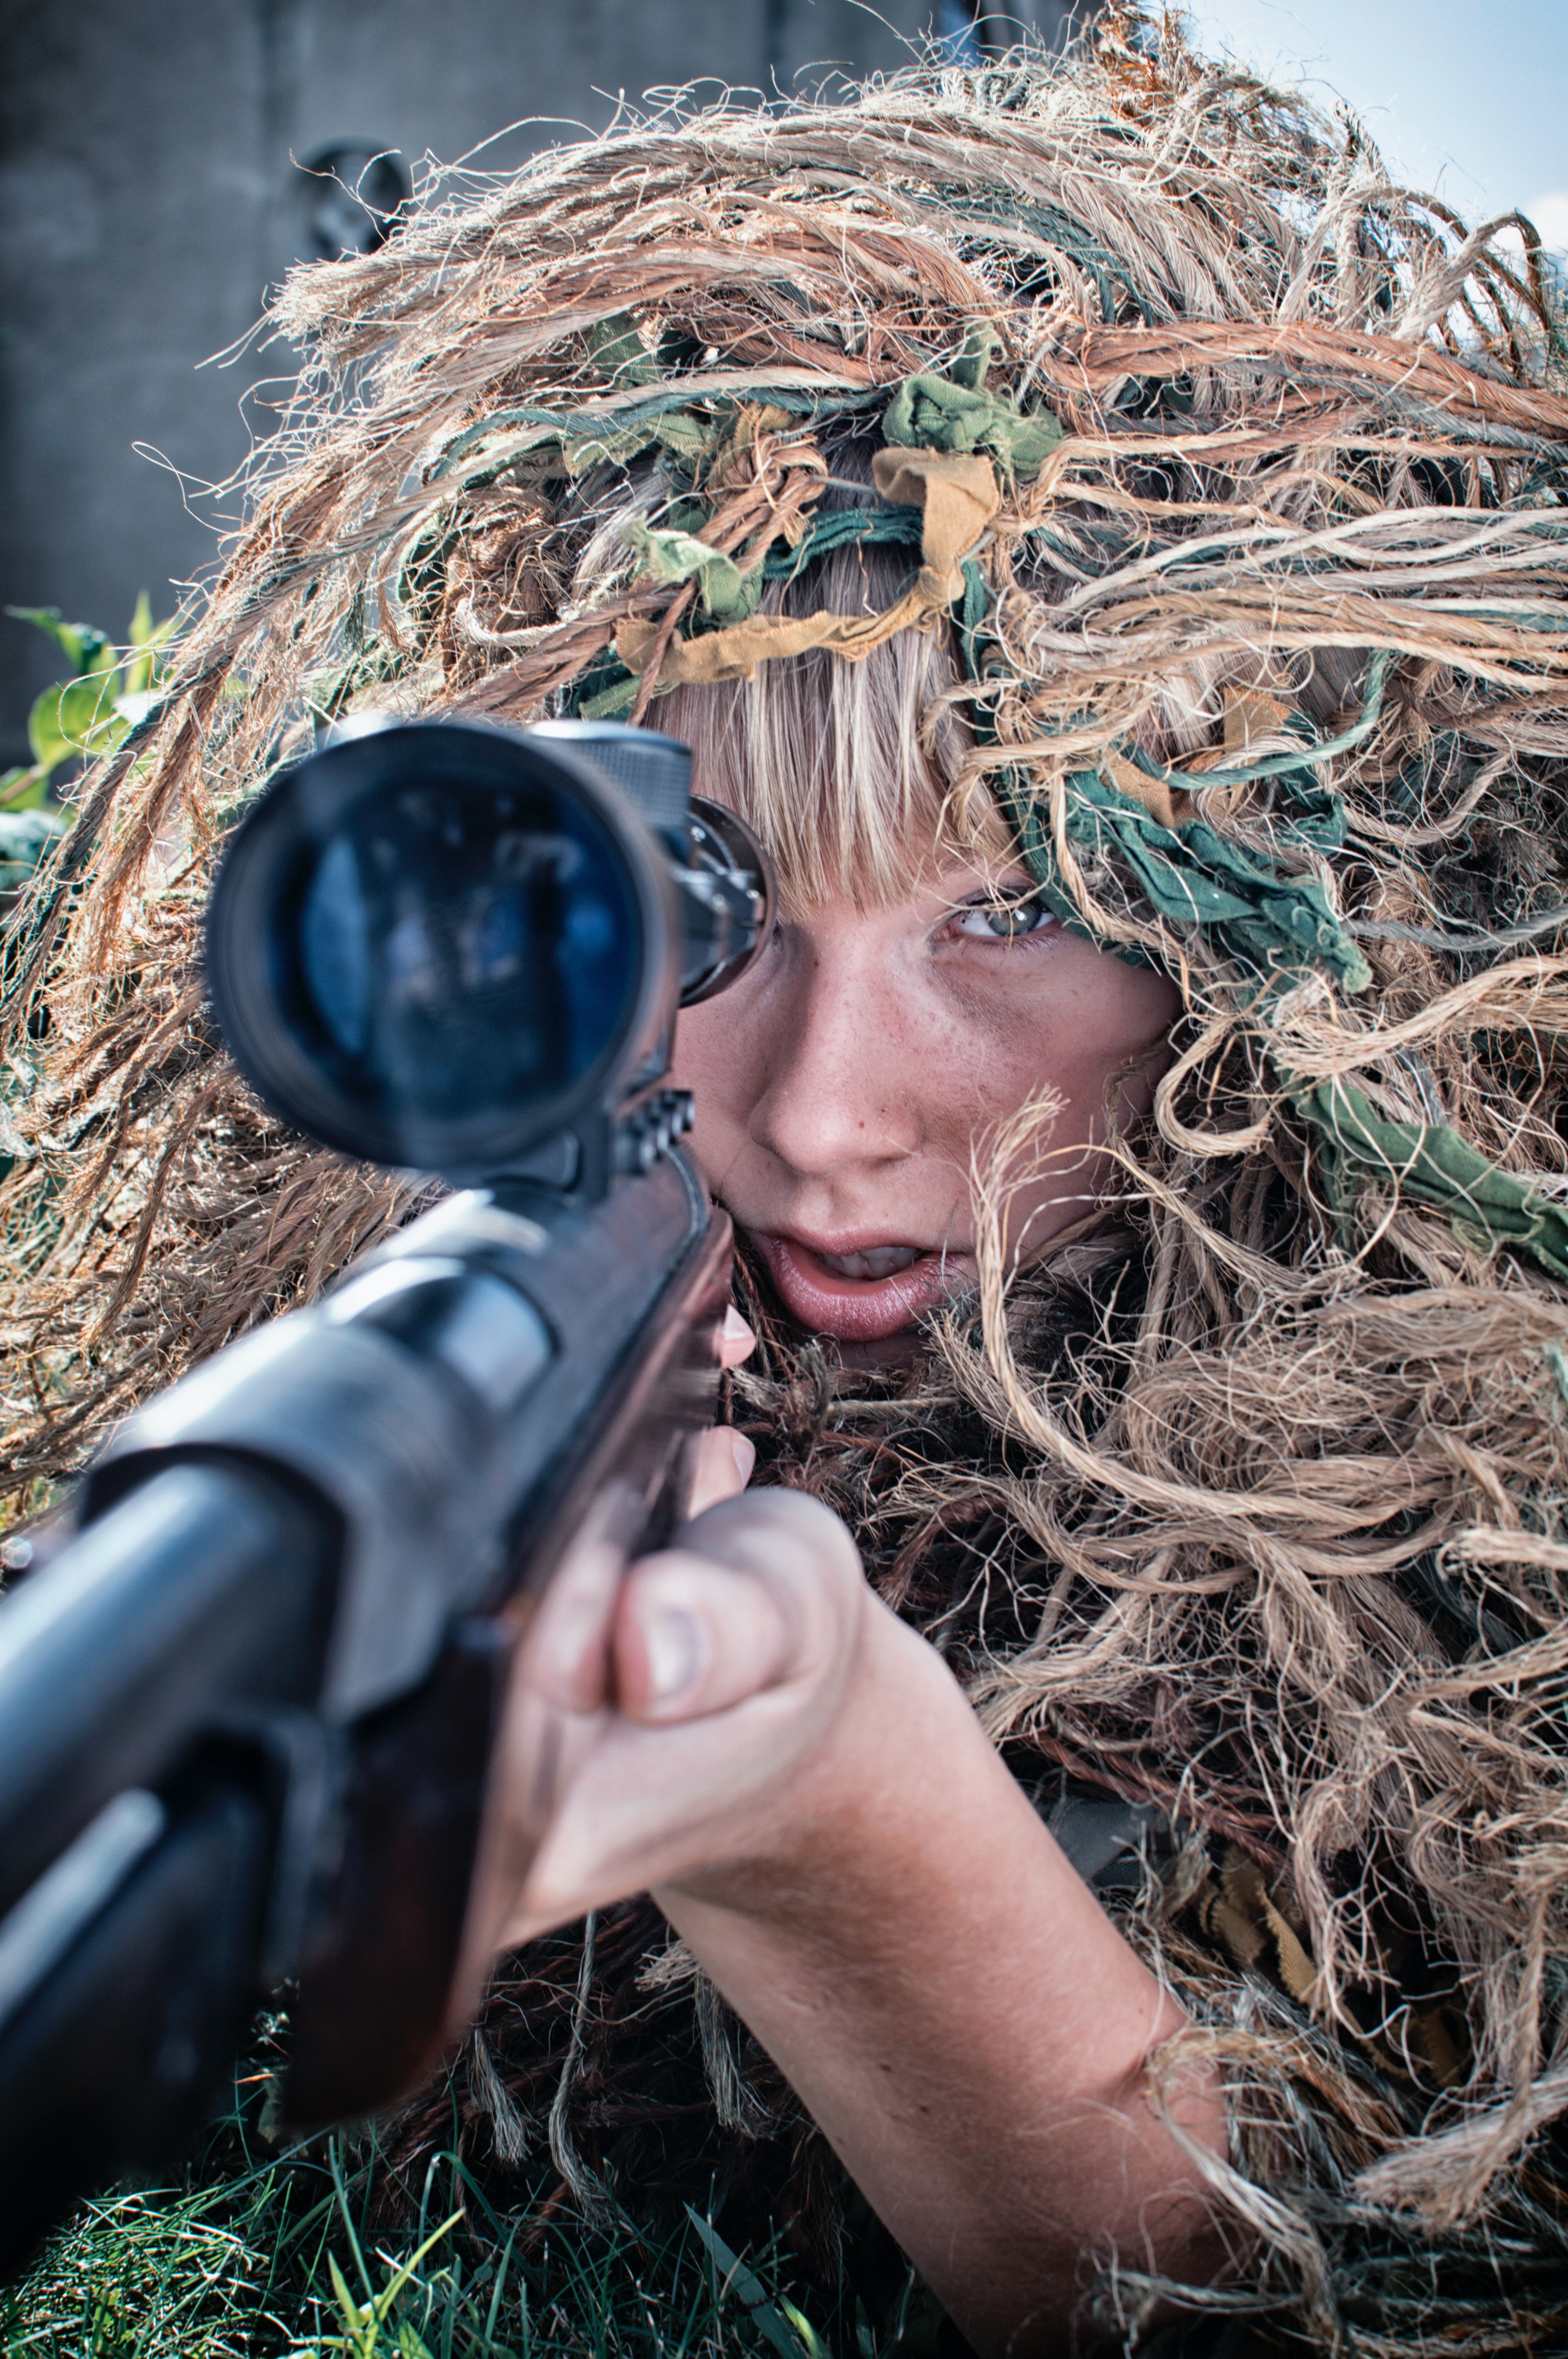 woman wearing gillie suit holding sniper rifle photo